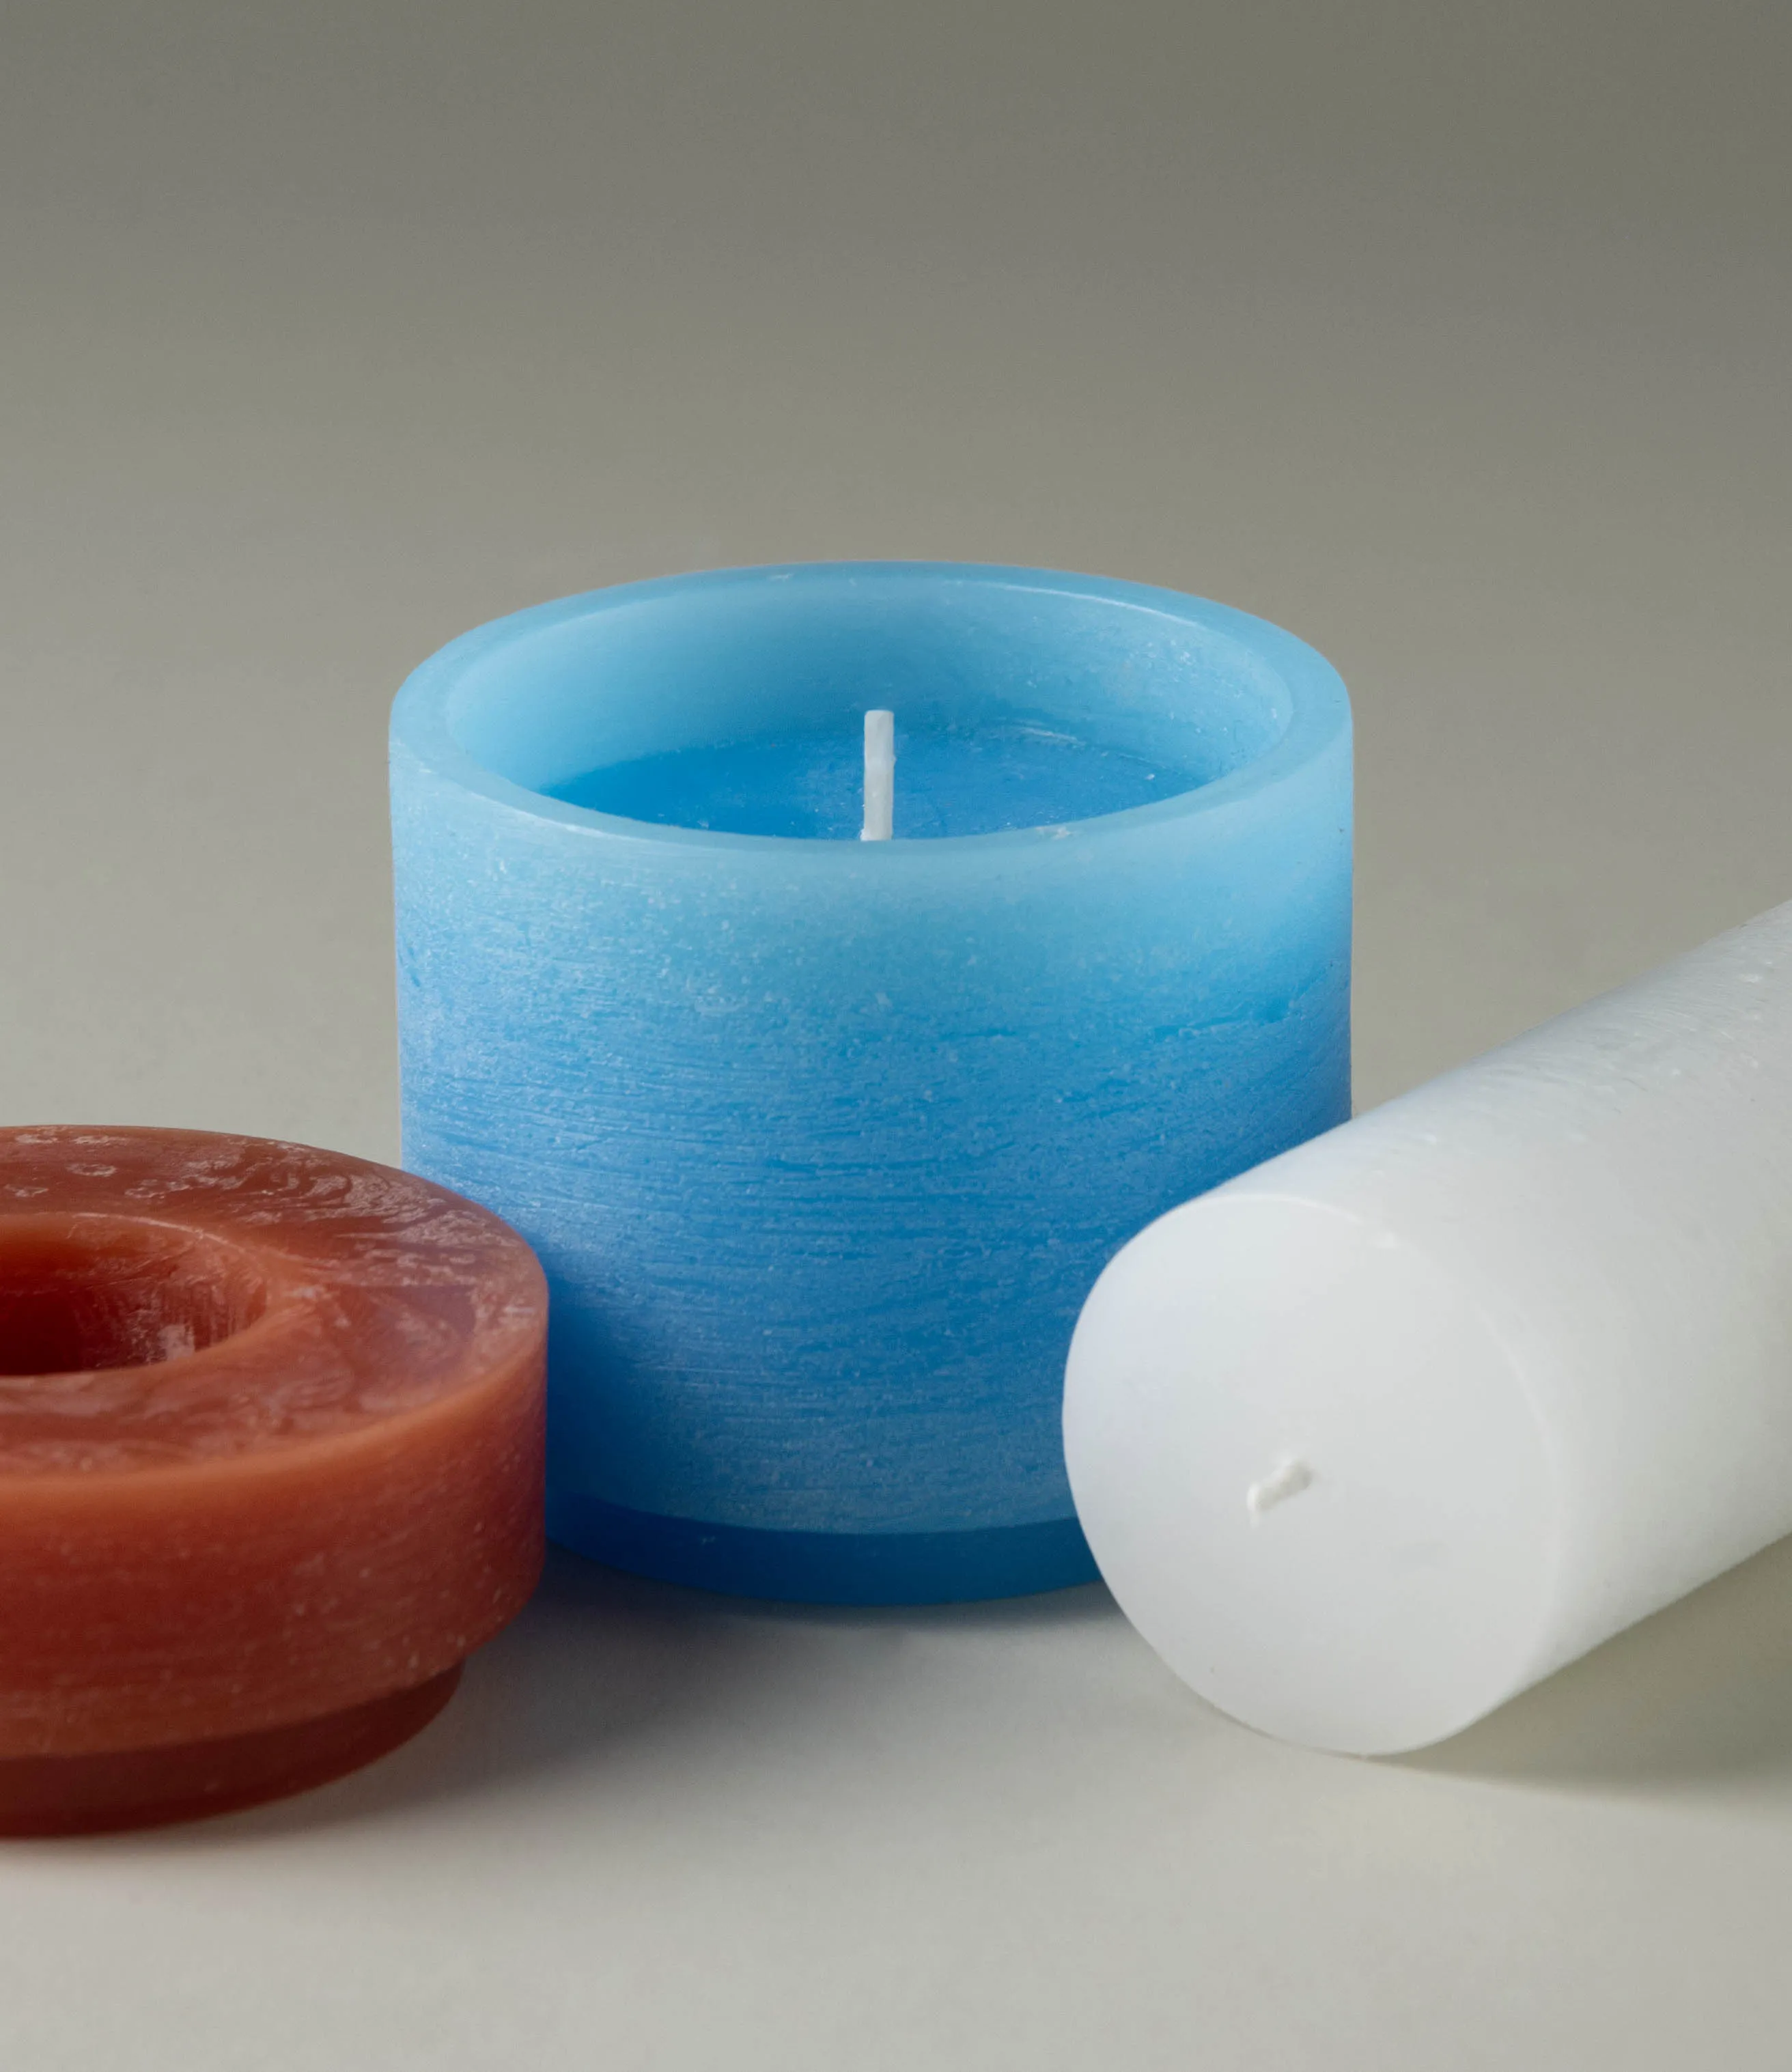 Stackable candle from Stan Editions. This particular piece comes in the color of burgundy, blue and white. The product consists of three pieces, they are unassembled on this picture. The texture of the product is rough gives a brushed effect.